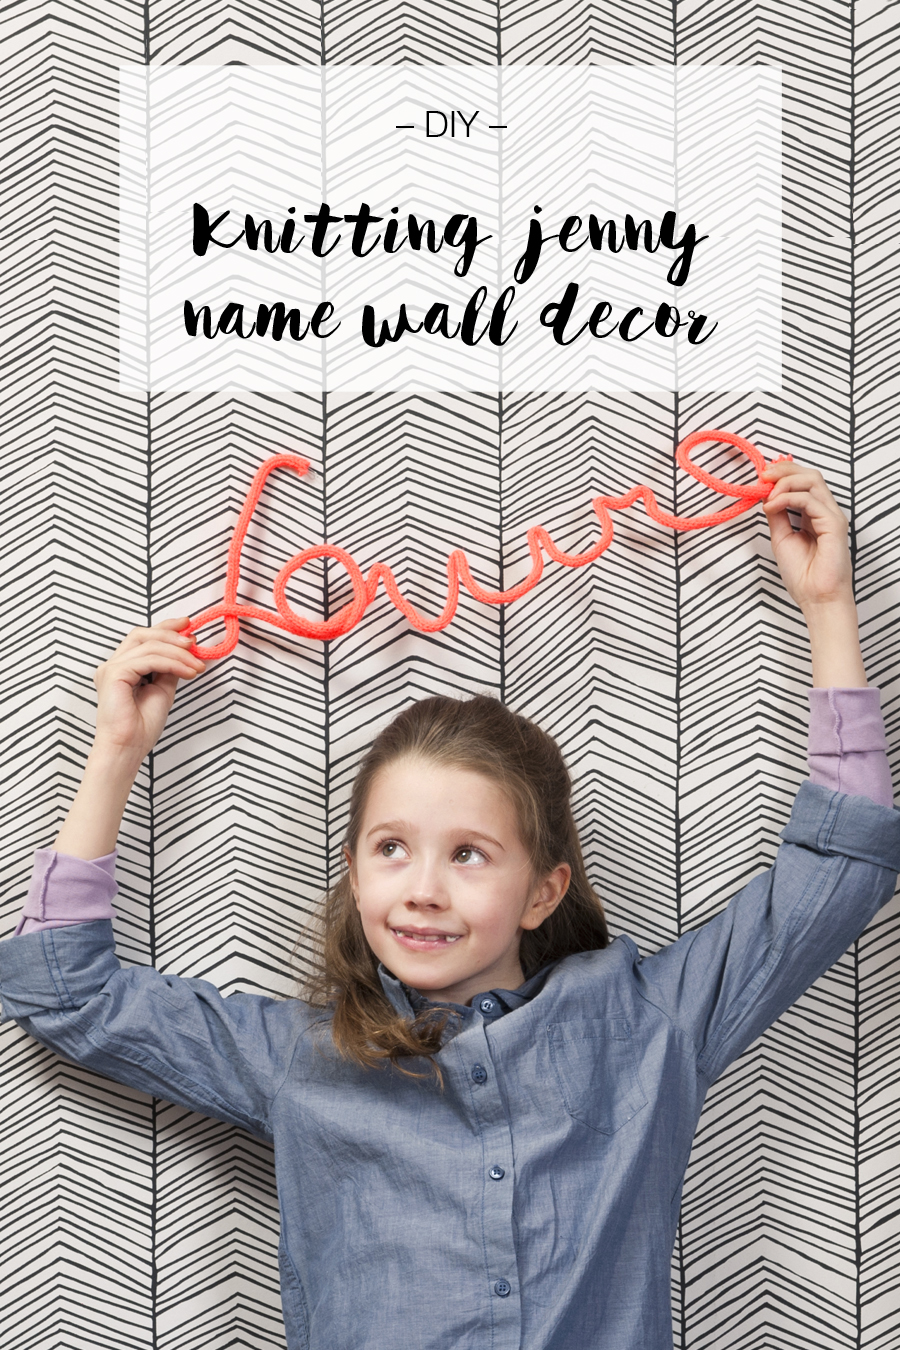 Knitting jenny name wall decor | LOOK WHAT I MADE ...